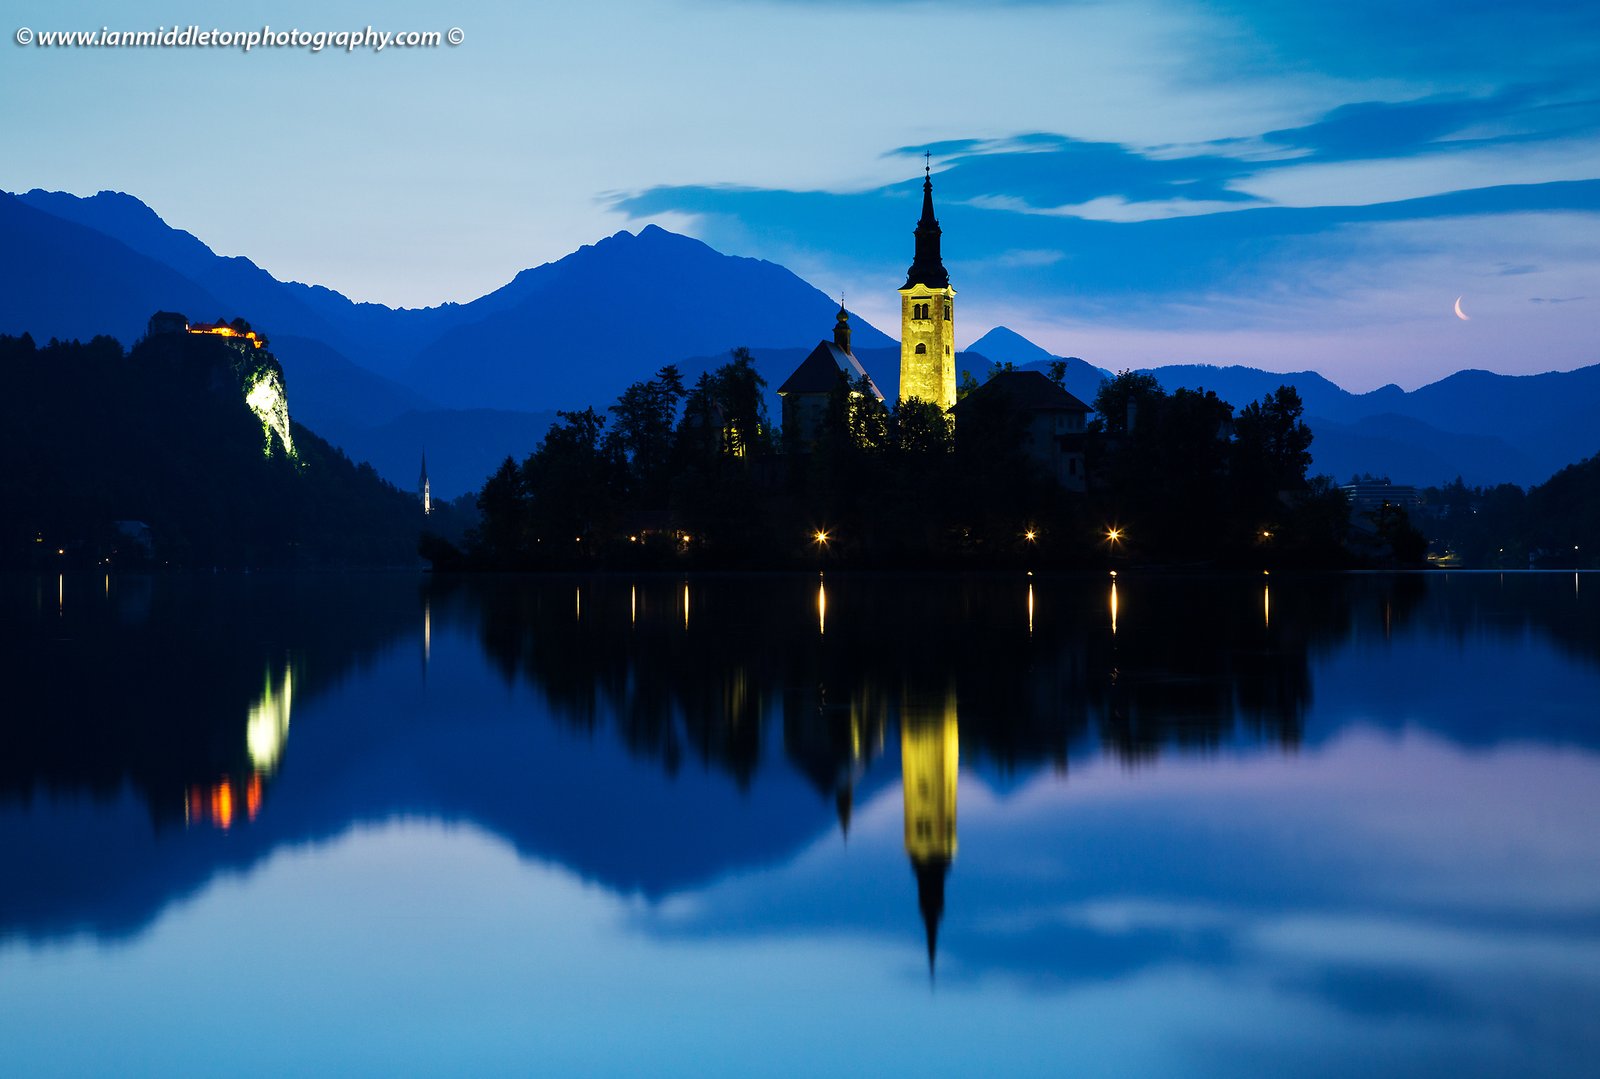 View across the beautiful Lake Bled, island church of the assumption of Mary, and hilltop castle, all topped off with the crescent of the waning moon at dawn, Slovenia.